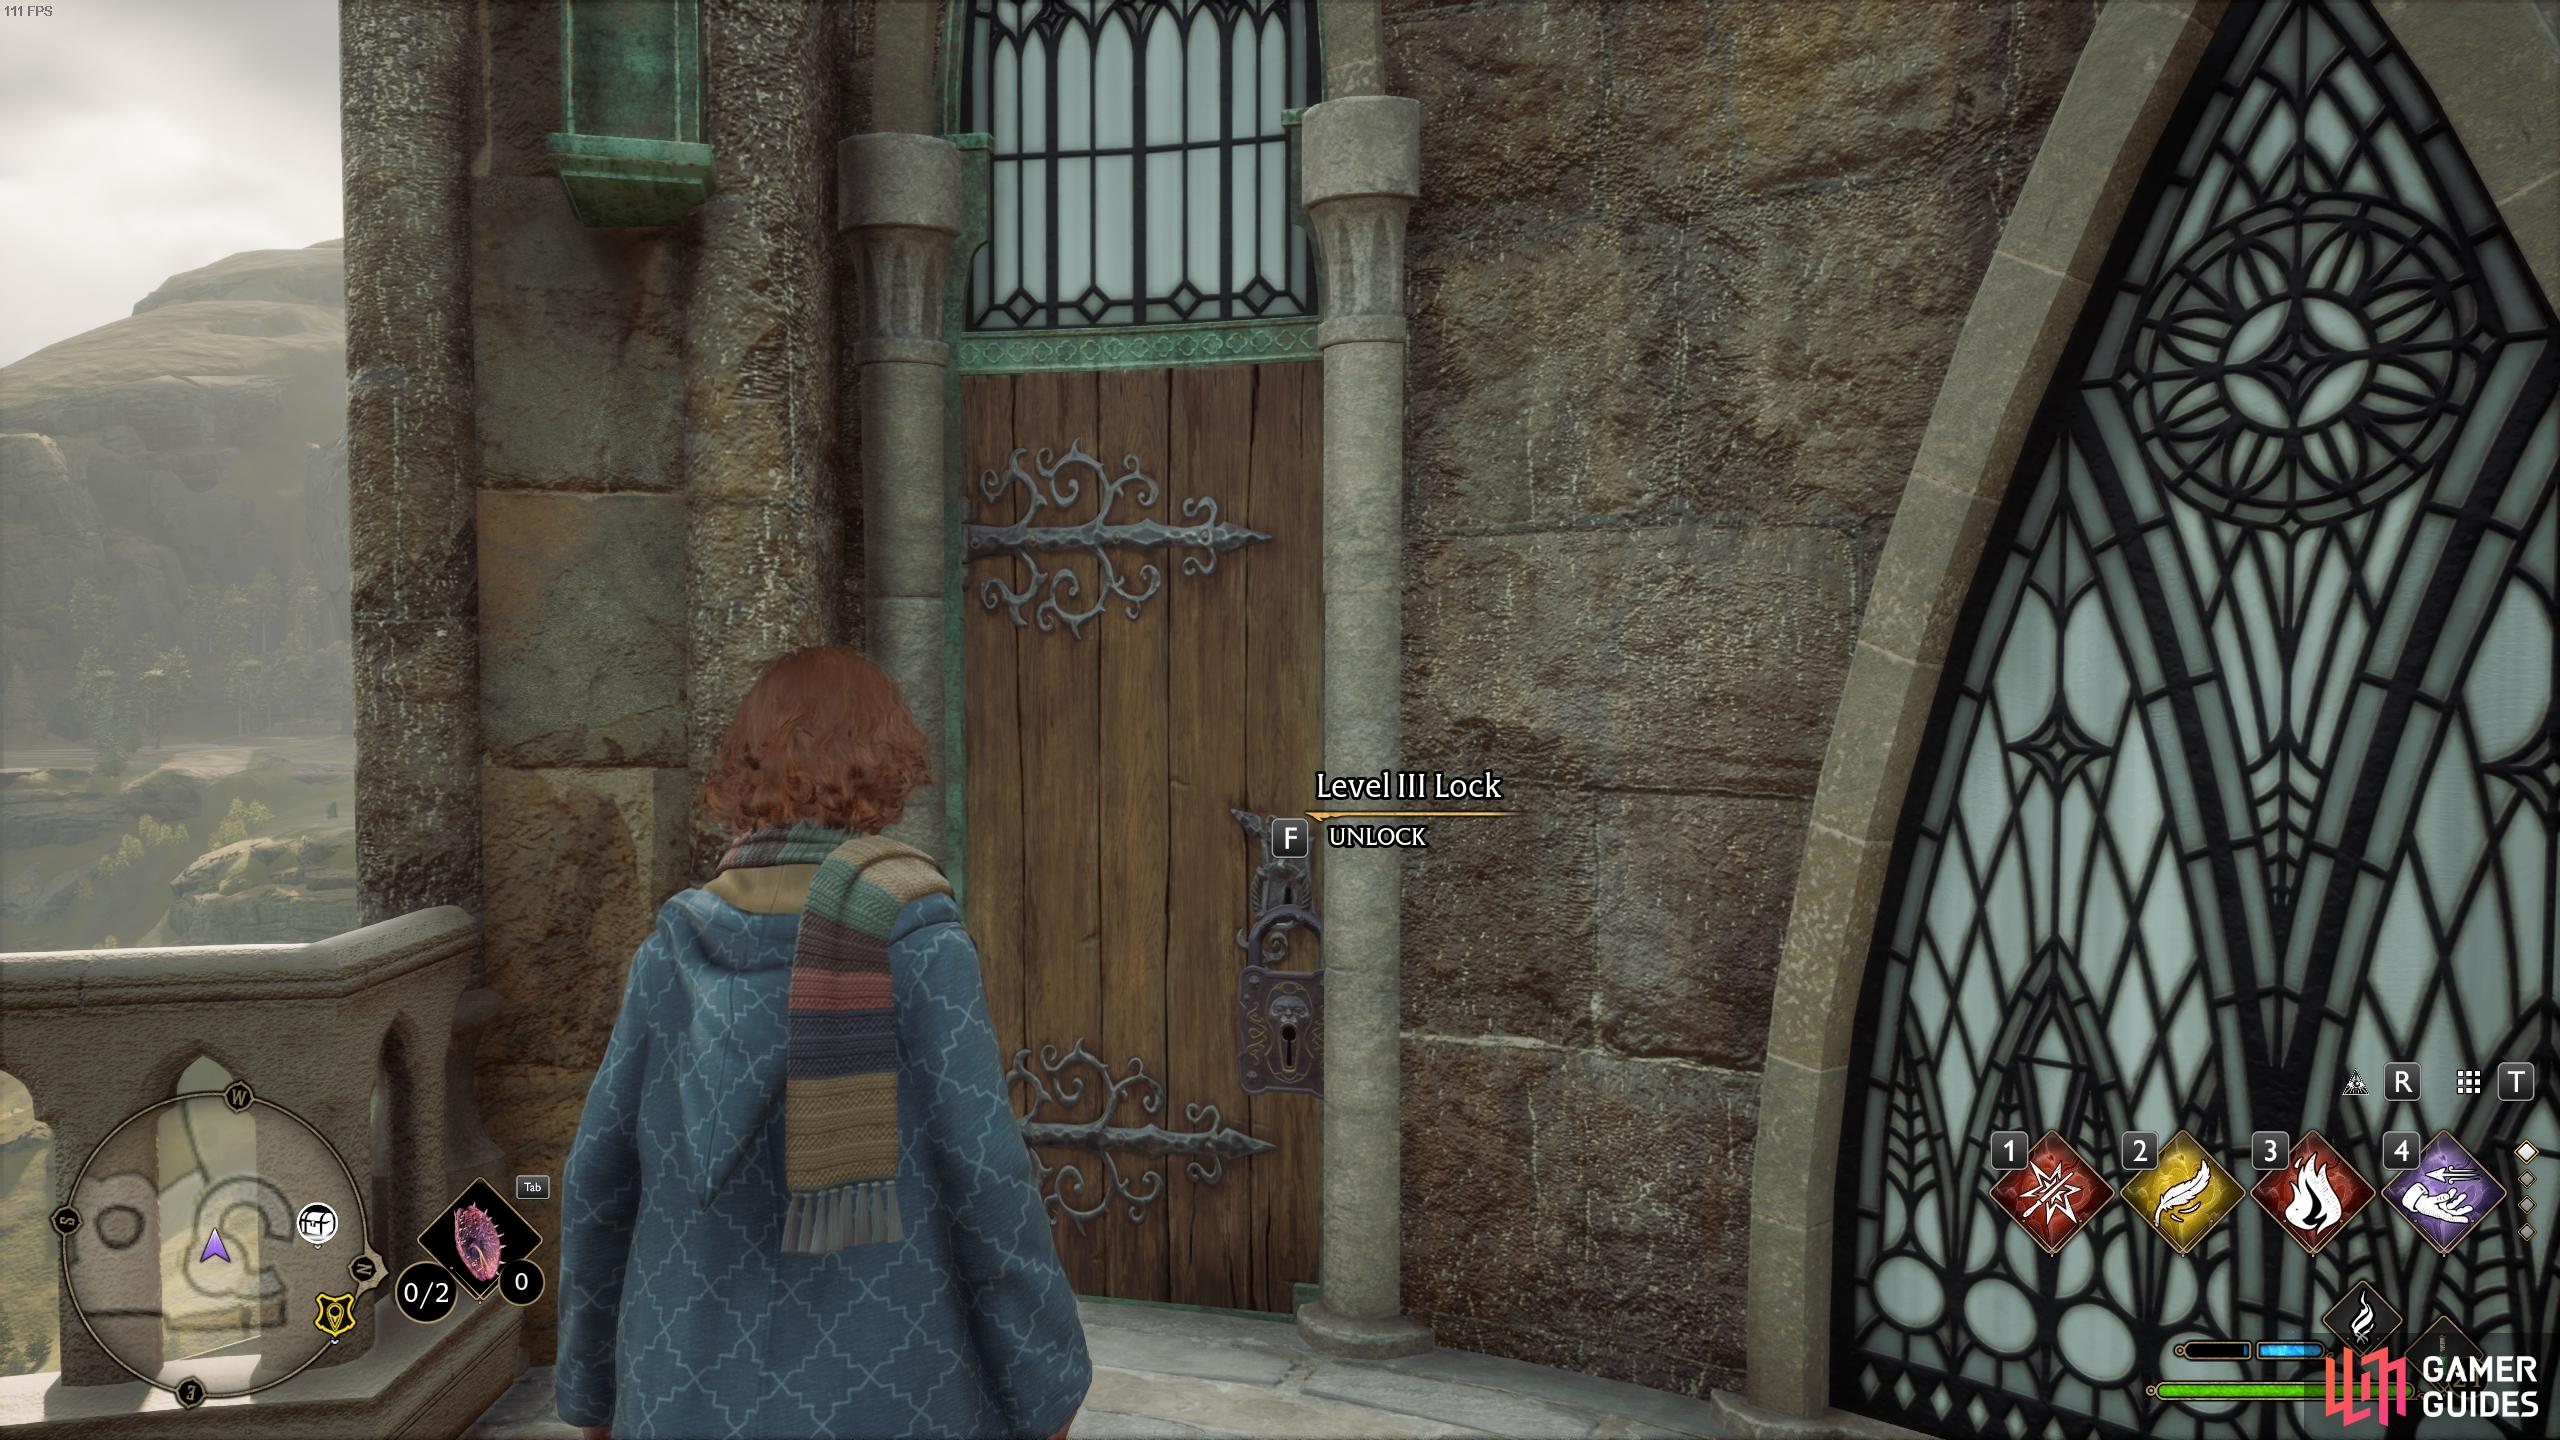 You can fly to the tower containing the Key of Admittance and open it from the outside with Alohomora Level III.